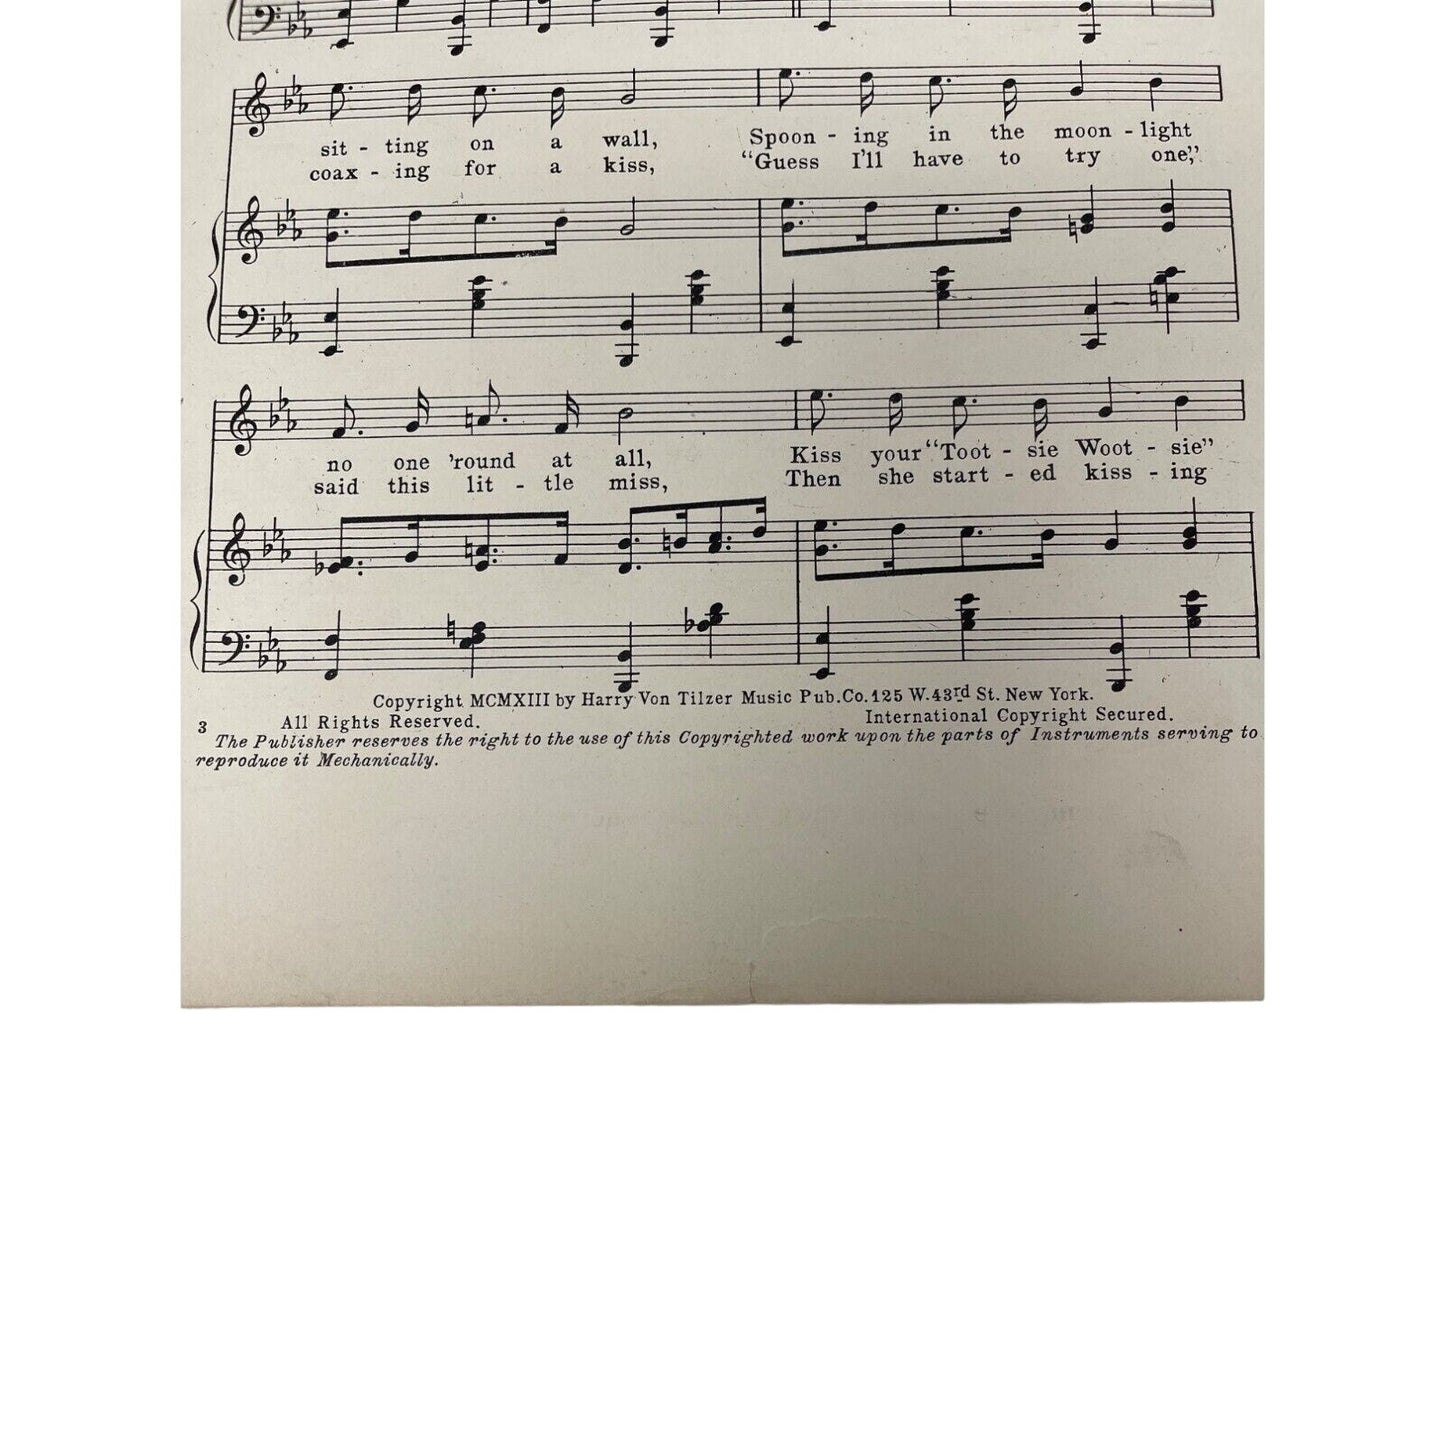 1913 Never Heard Of Anyone Dying From A Kiss Sheet Music Andrew Sterling